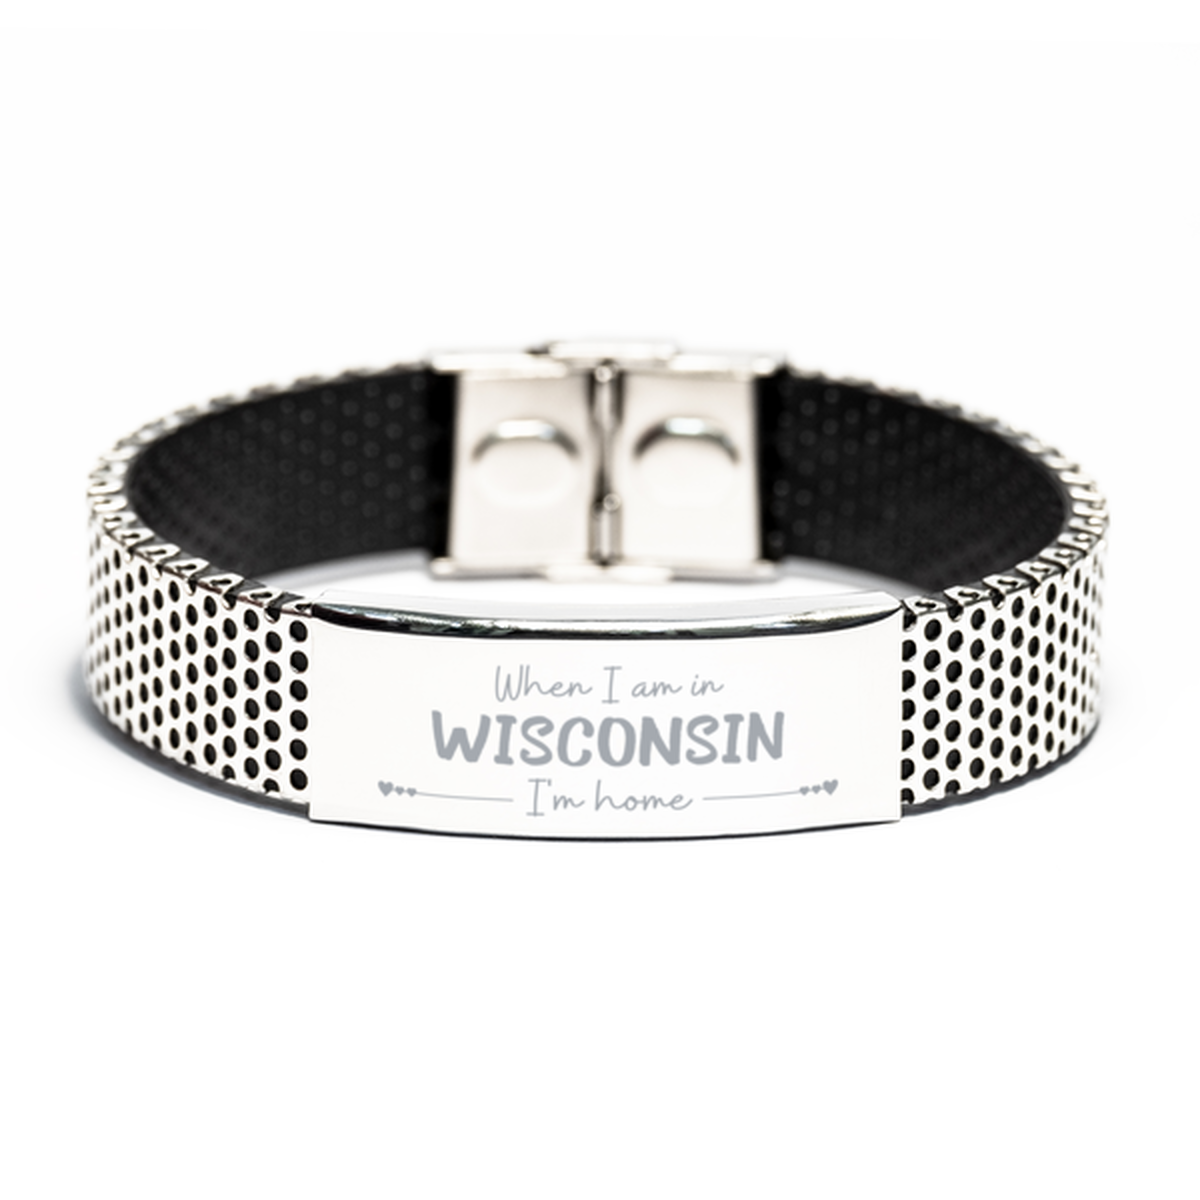 When I am in Wisconsin I'm home Stainless Steel Bracelet, Cheap Gifts For Wisconsin, State Wisconsin Birthday Gifts for Friends Coworker